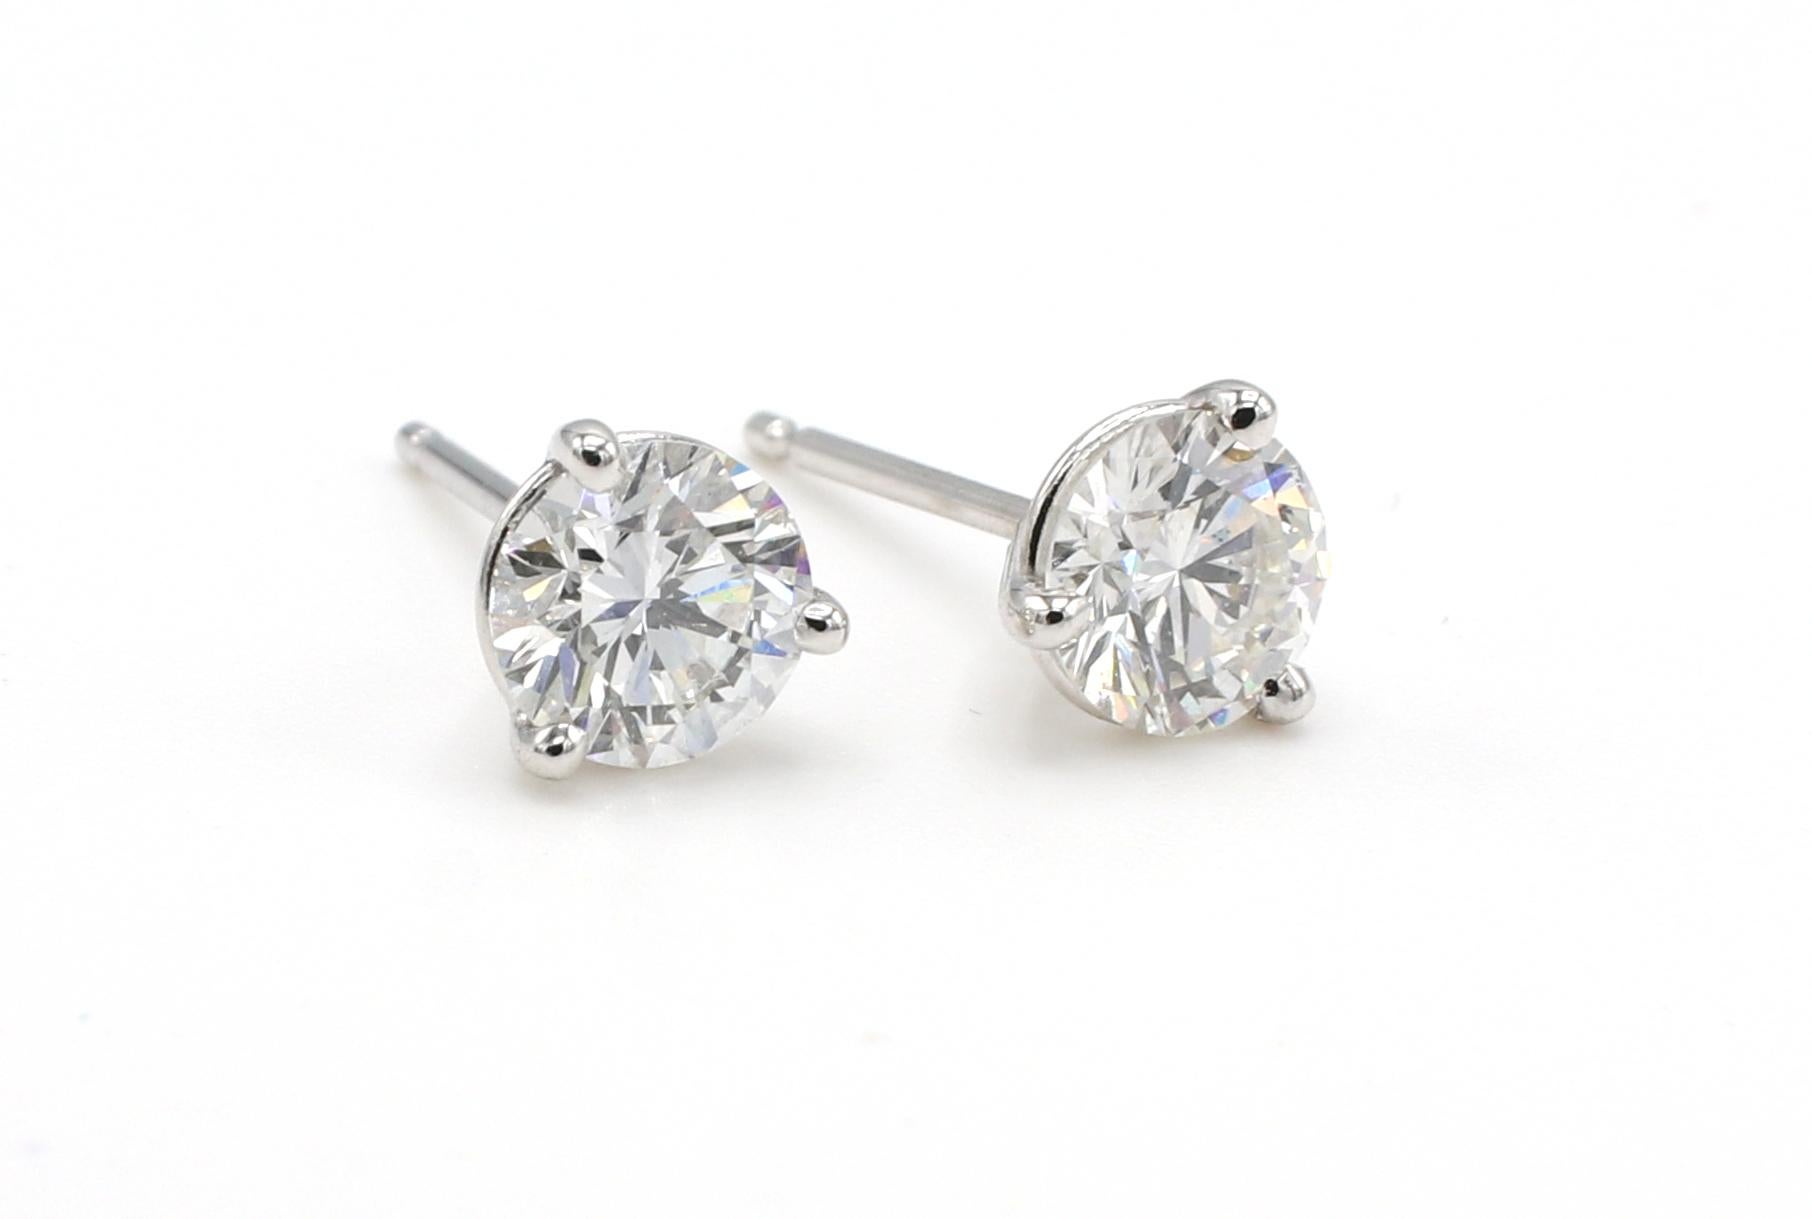 GIA Certified 1.08 Carat Round Natural Diamond White Gold Martini Stud Earrings 
GIA report numbers: 1216273443 & 2211273462 (see reports pictured for details) 
Diamonds: Round Brilliant 0.55 E SI2 & 0.53 E SI2 natural diamonds
Metal: 14k white